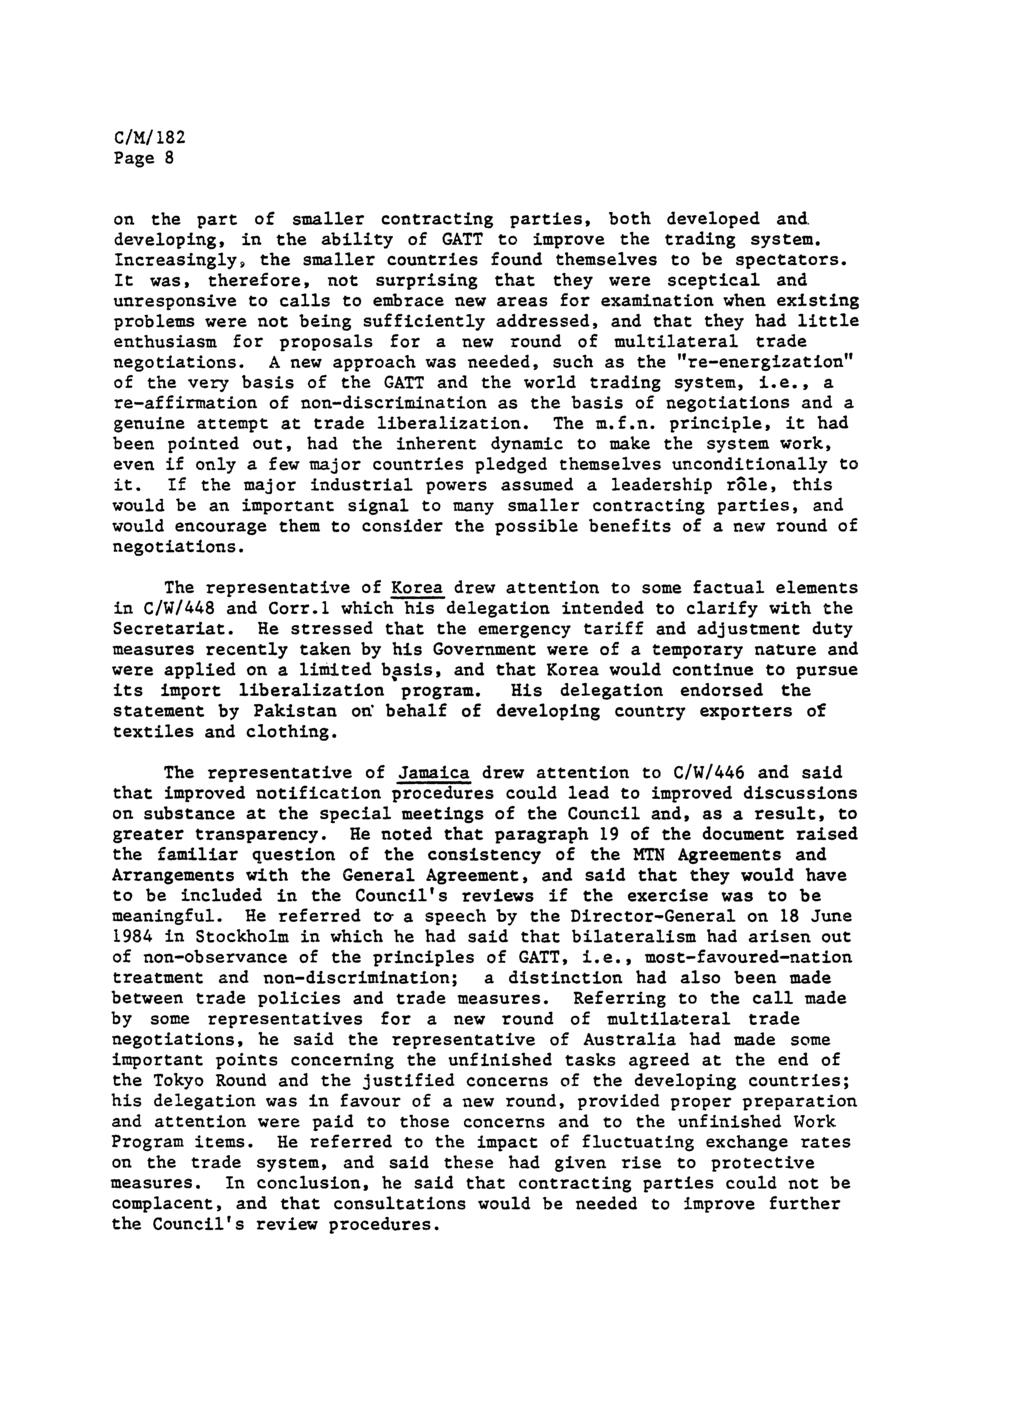 Page 8 on the part of smaller contracting parties, both developed and. developing, in the ability of GATT to improve the trading system.